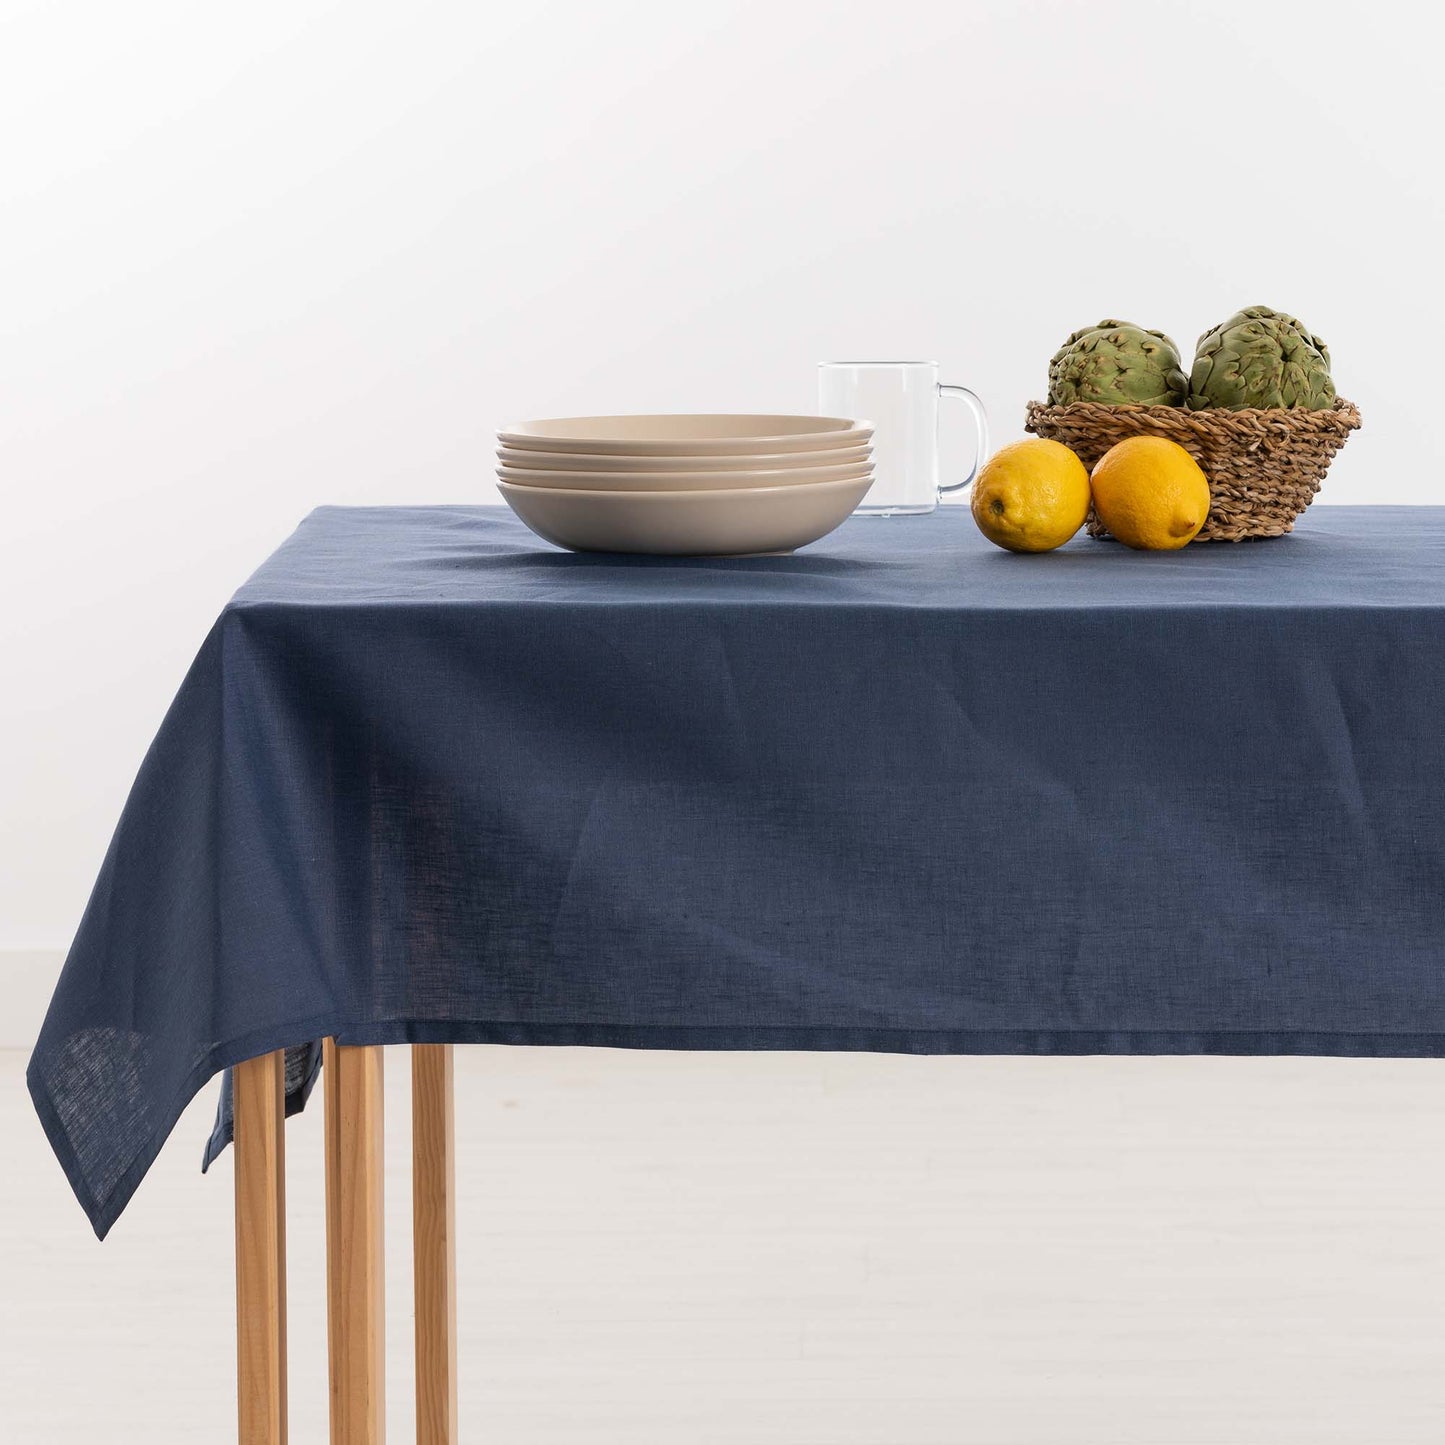 100% Night Blue Linen waterproof stain-resistant tablecloth